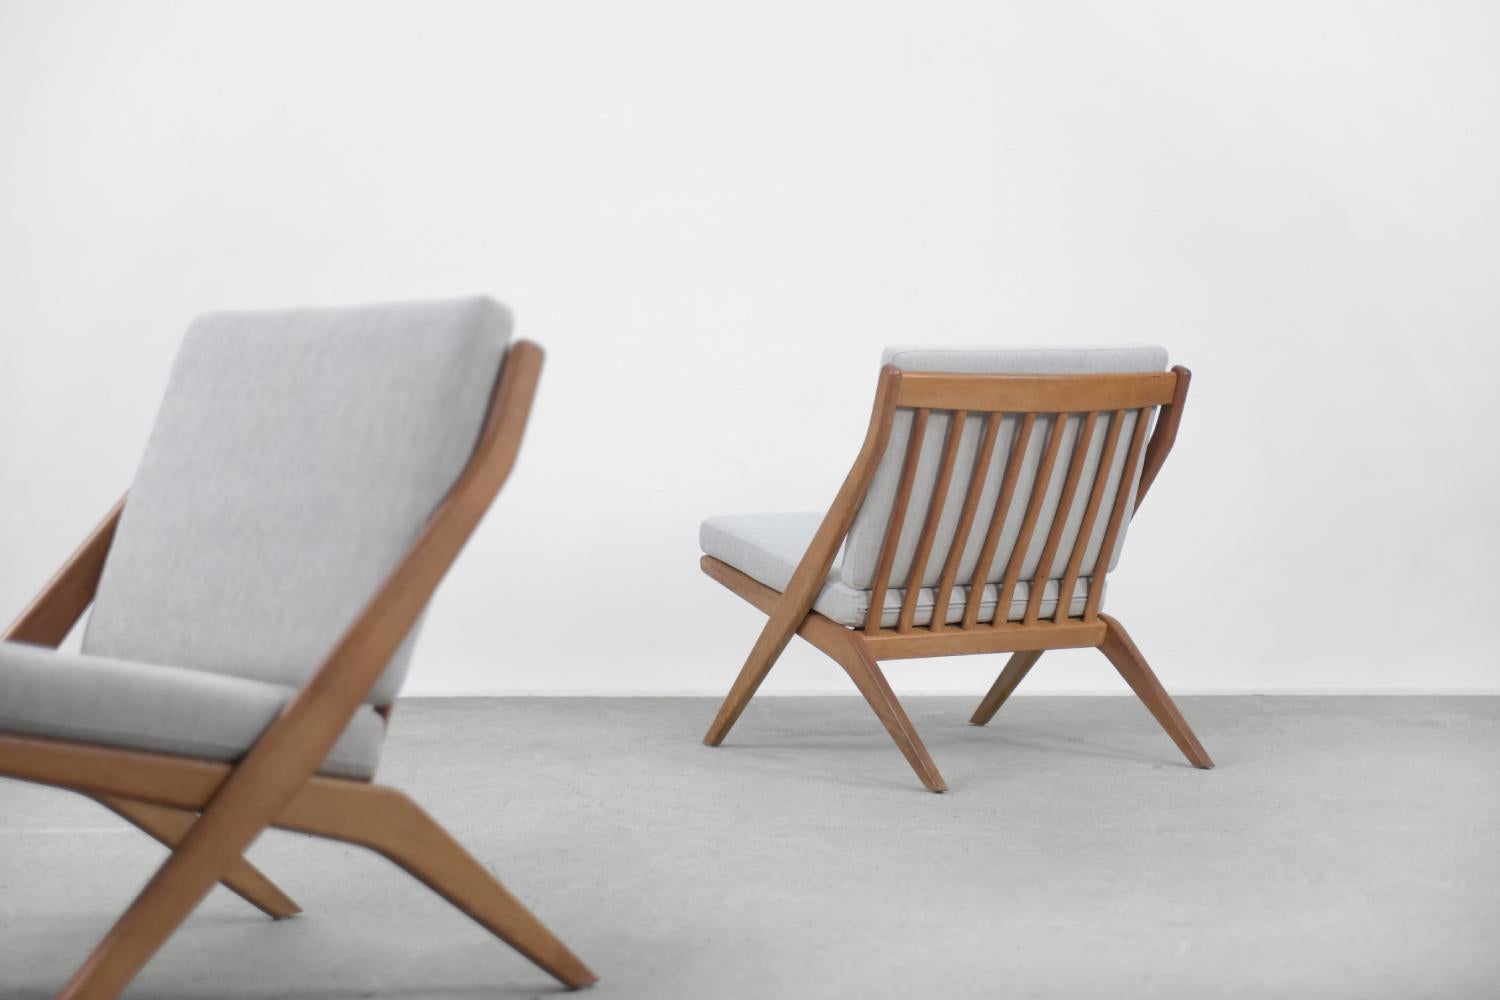 Pair of Mid-Century Modern Swedish Scissor Chairs by Folke Ohlsson for Bodafors For Sale 3